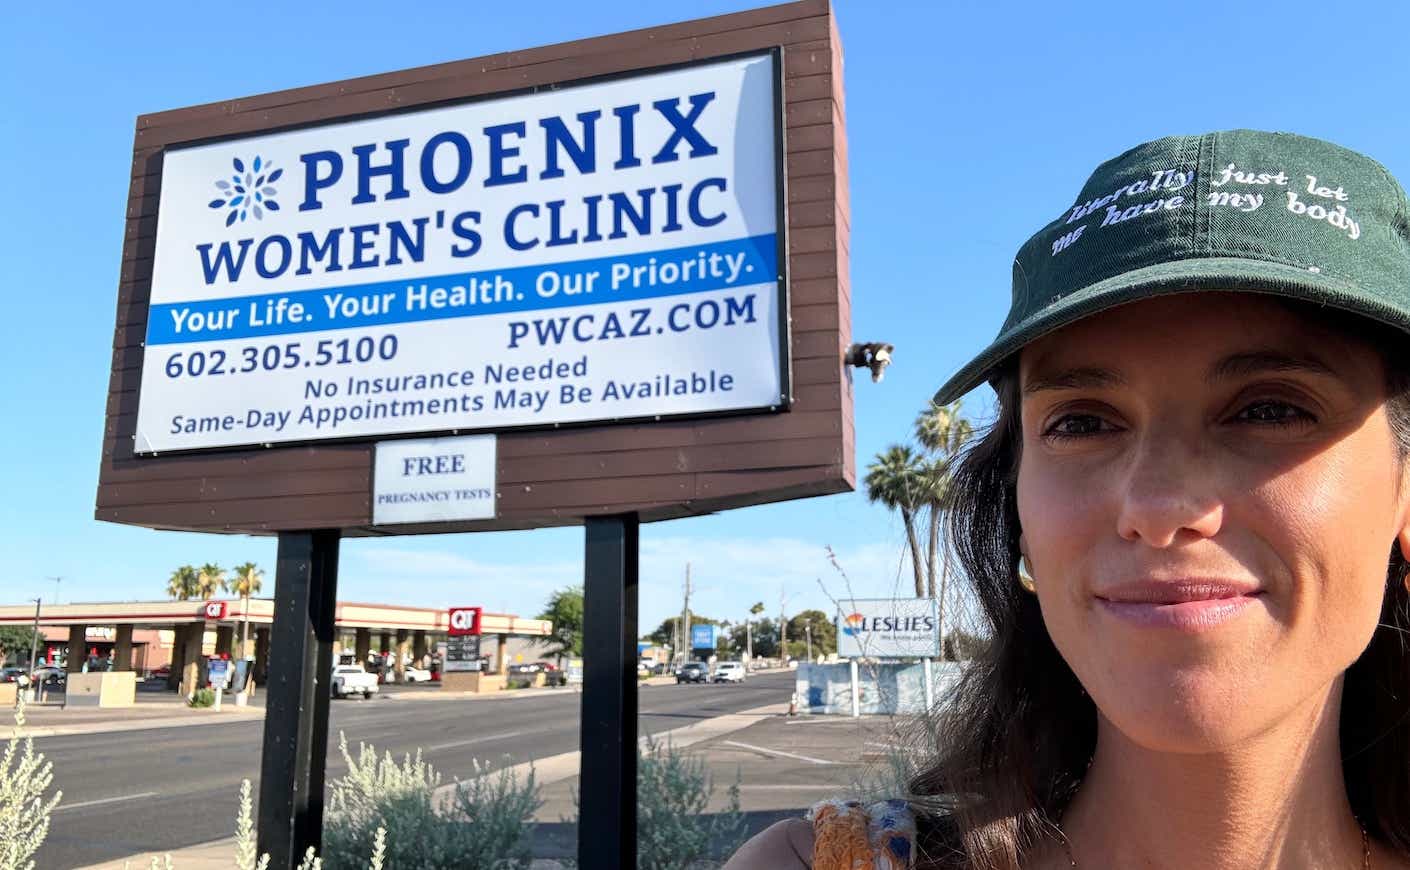 Liz Plank in front of a fake abortion clinic in Arizona